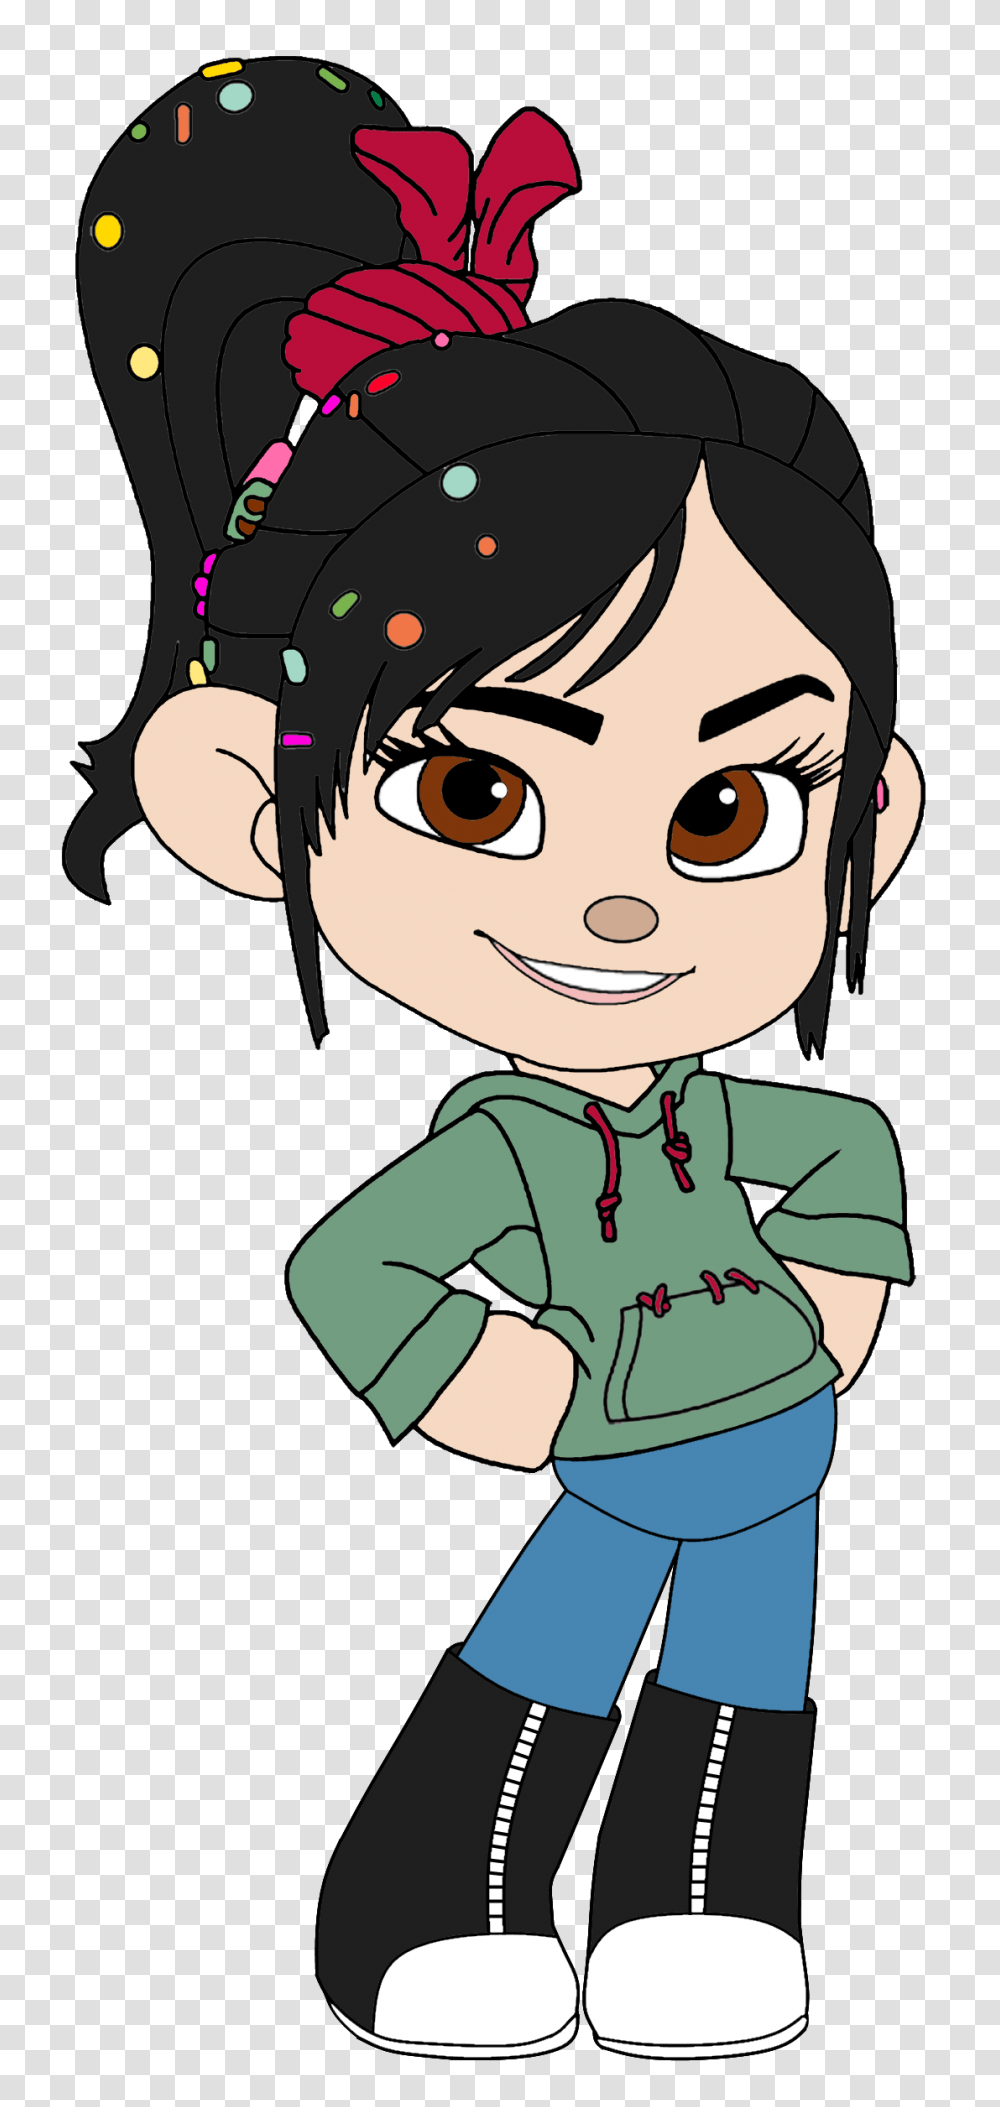 Disney Junior Images Vanellope In Jeans And Sneakers Hd Wallpaper, Person, Elf Transparent Png